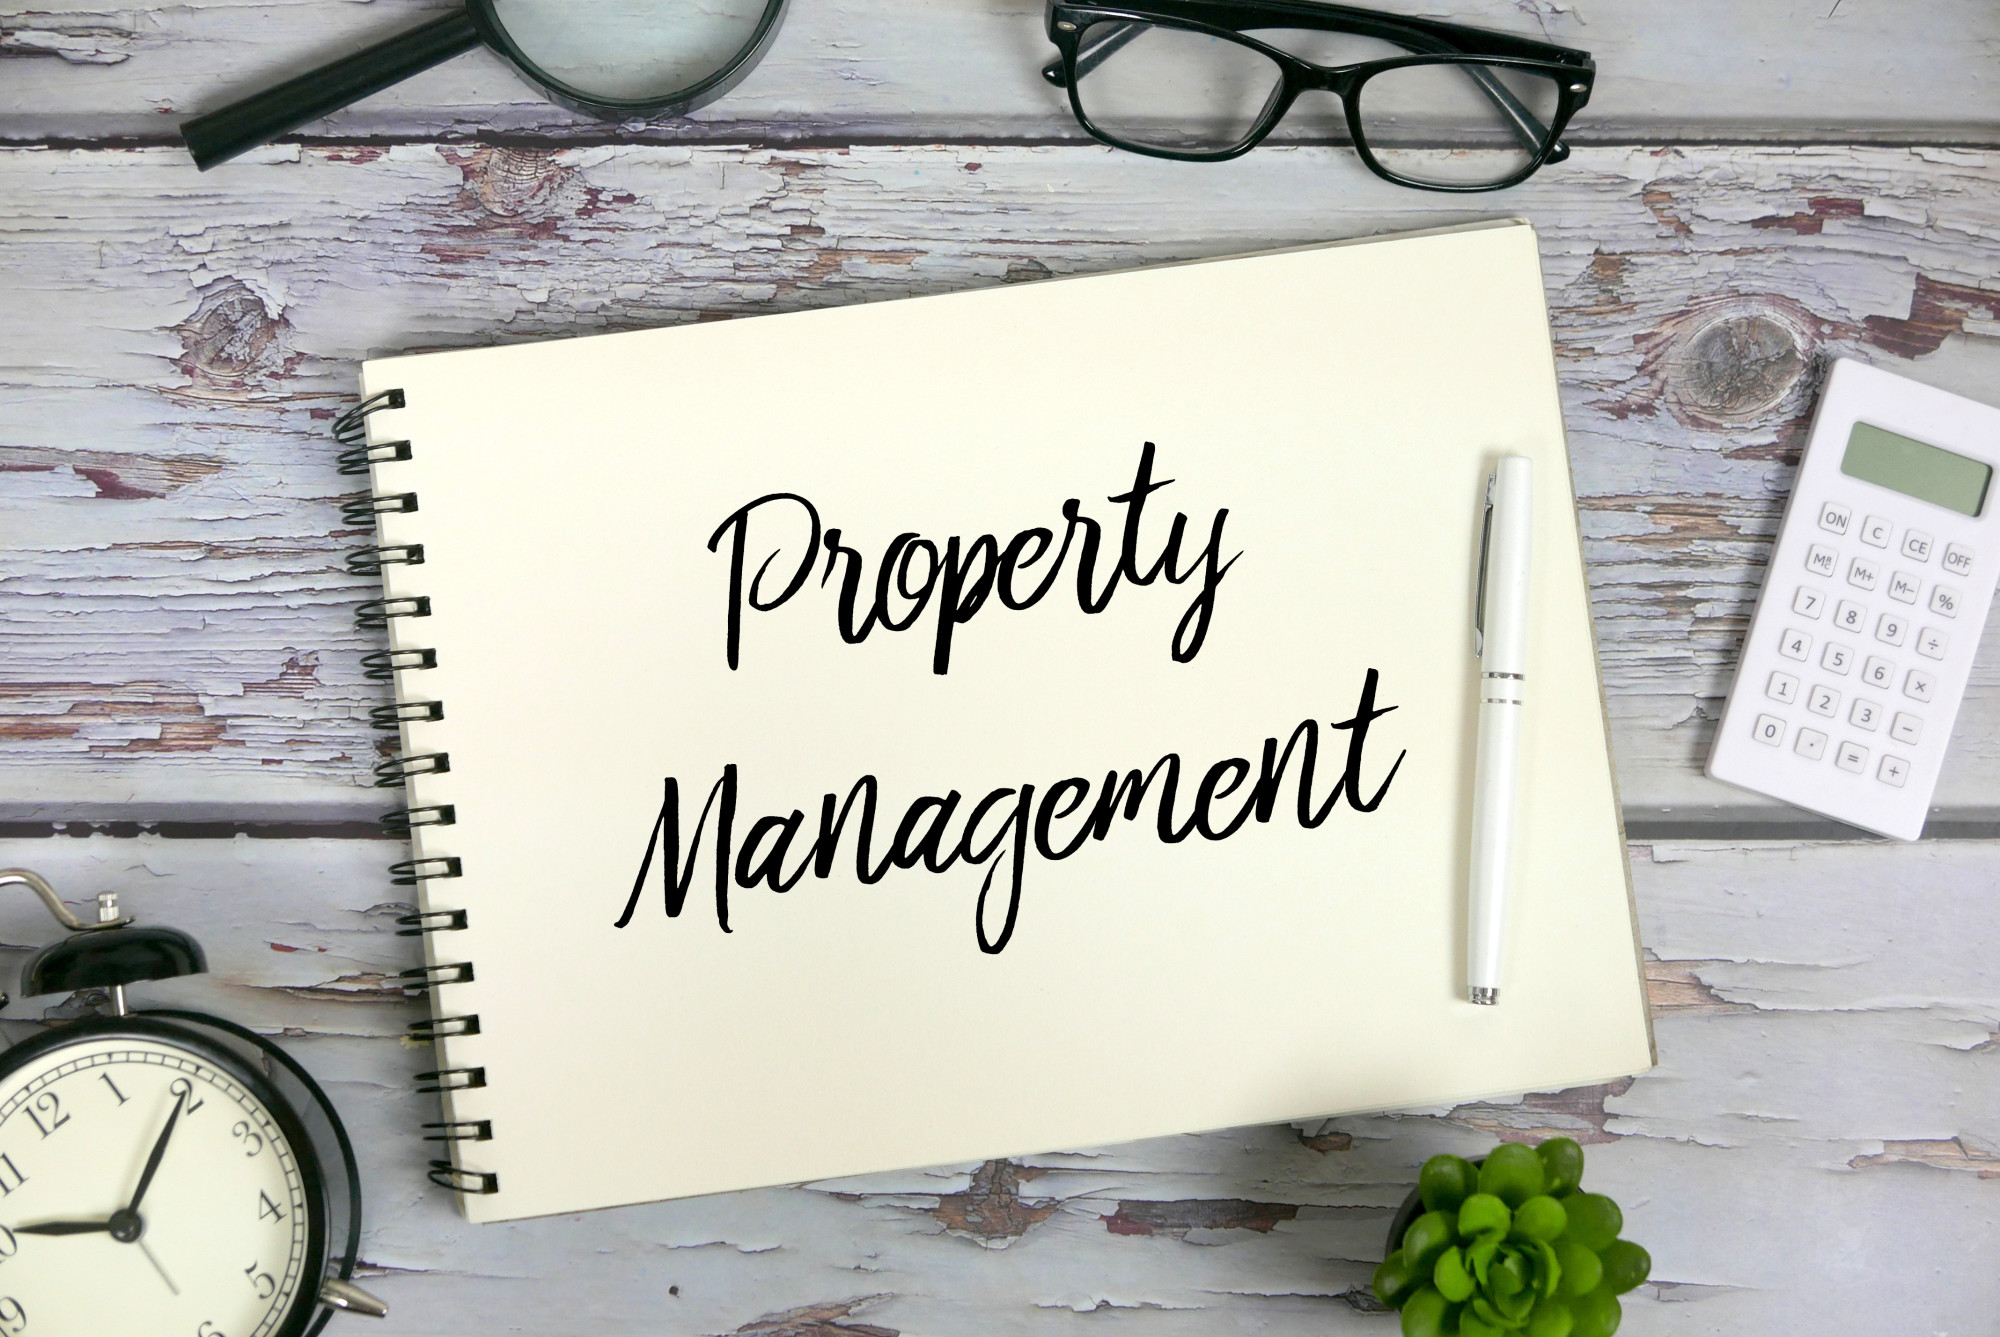 Have you ever asked yourself the question: what do property management companies charge? Read on to learn more on the subject.